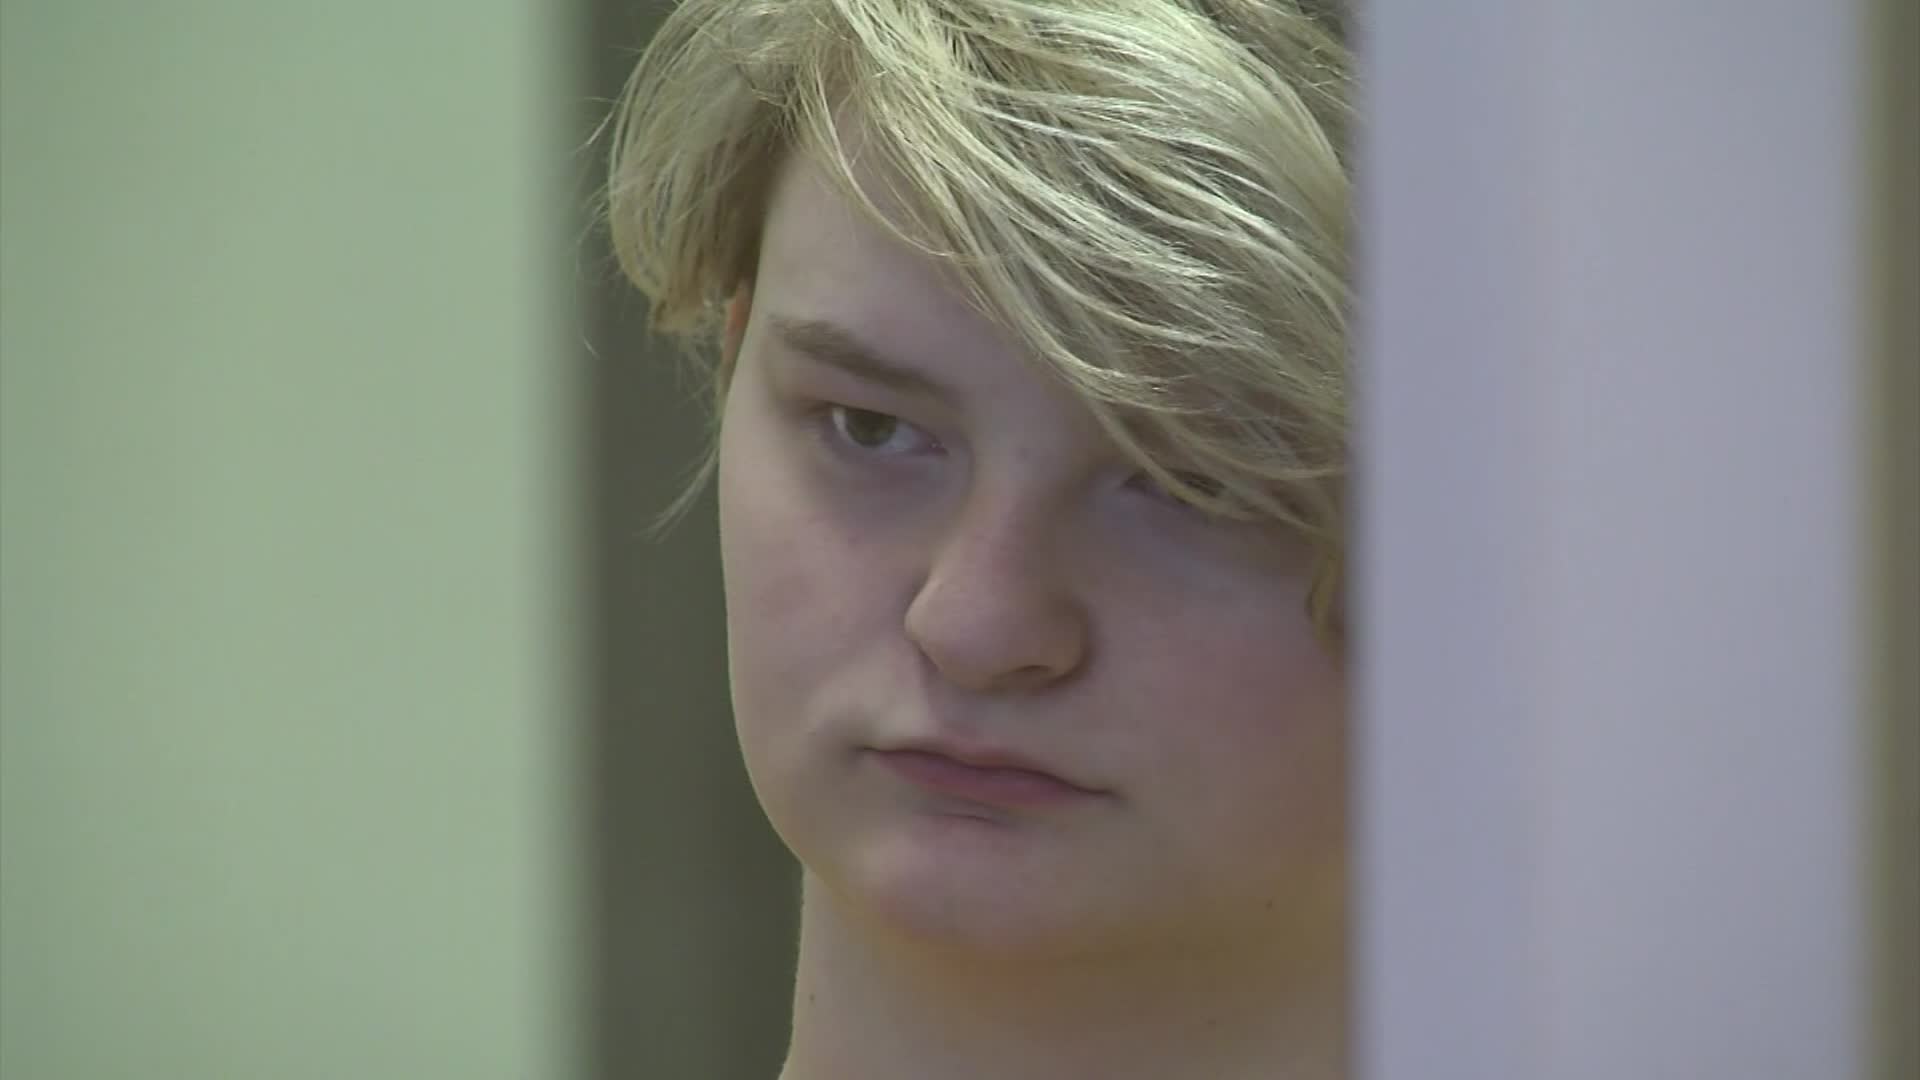 18 Year Old Xx - An Alaska teen is accused of killing her friend after a man she met online  told her he'd pay $9 million for videos of the murder | CNN